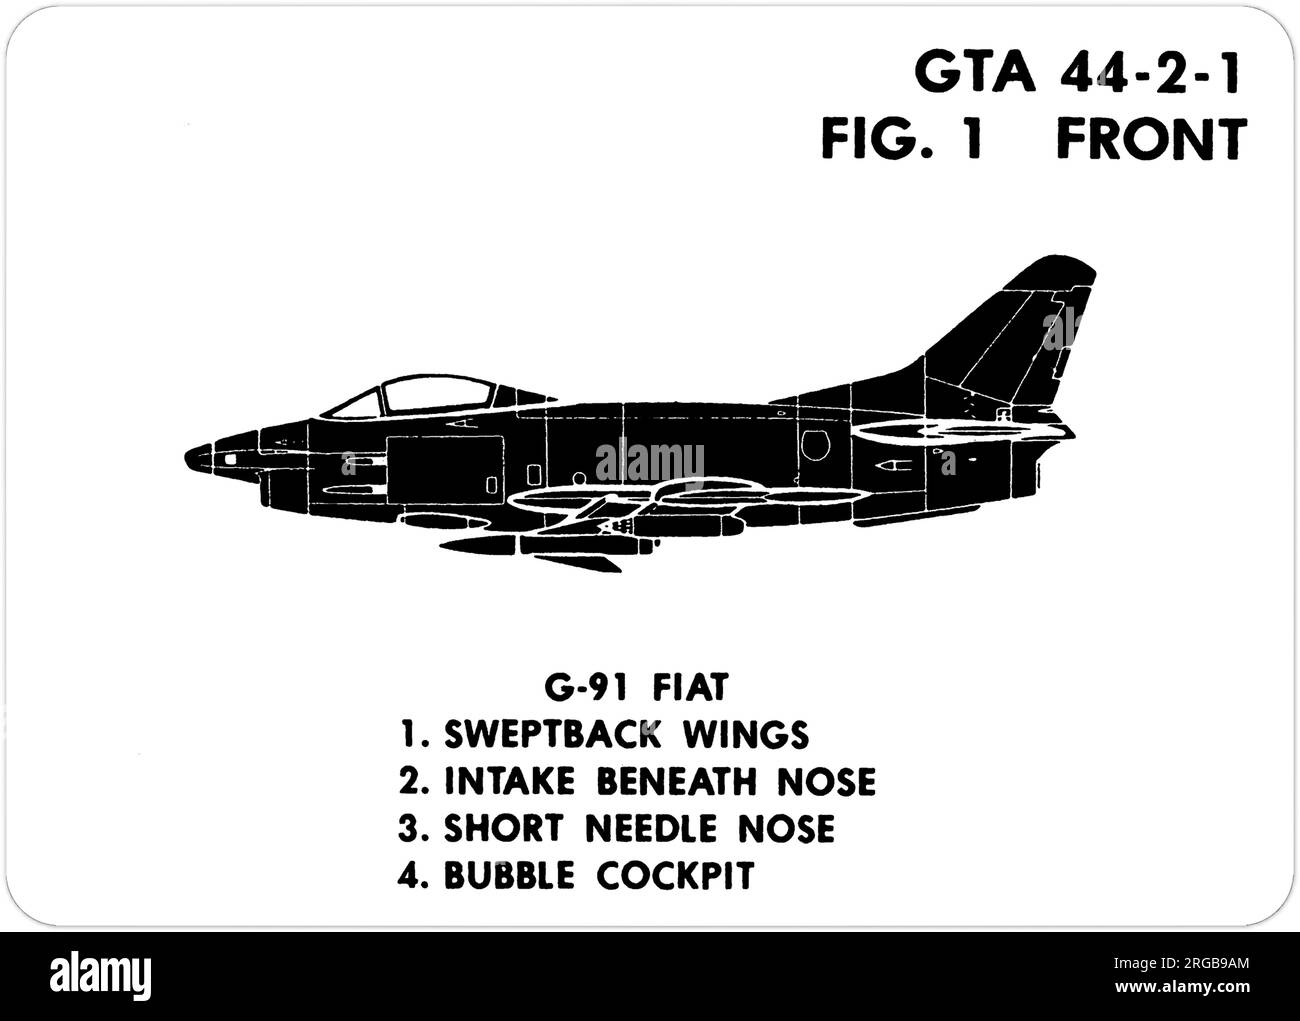 Fiat G.91 profile. This is one of the series of Graphics Training Aids (GTA) used by the United States Army to train their personnel to recognize friendly and hostile aircraft. This particular set, GTA 44-2-1, was issued in July1977. The set features aircraft from: Canada, Italy, United Kingdom, United States, and the USSR. Stock Photo